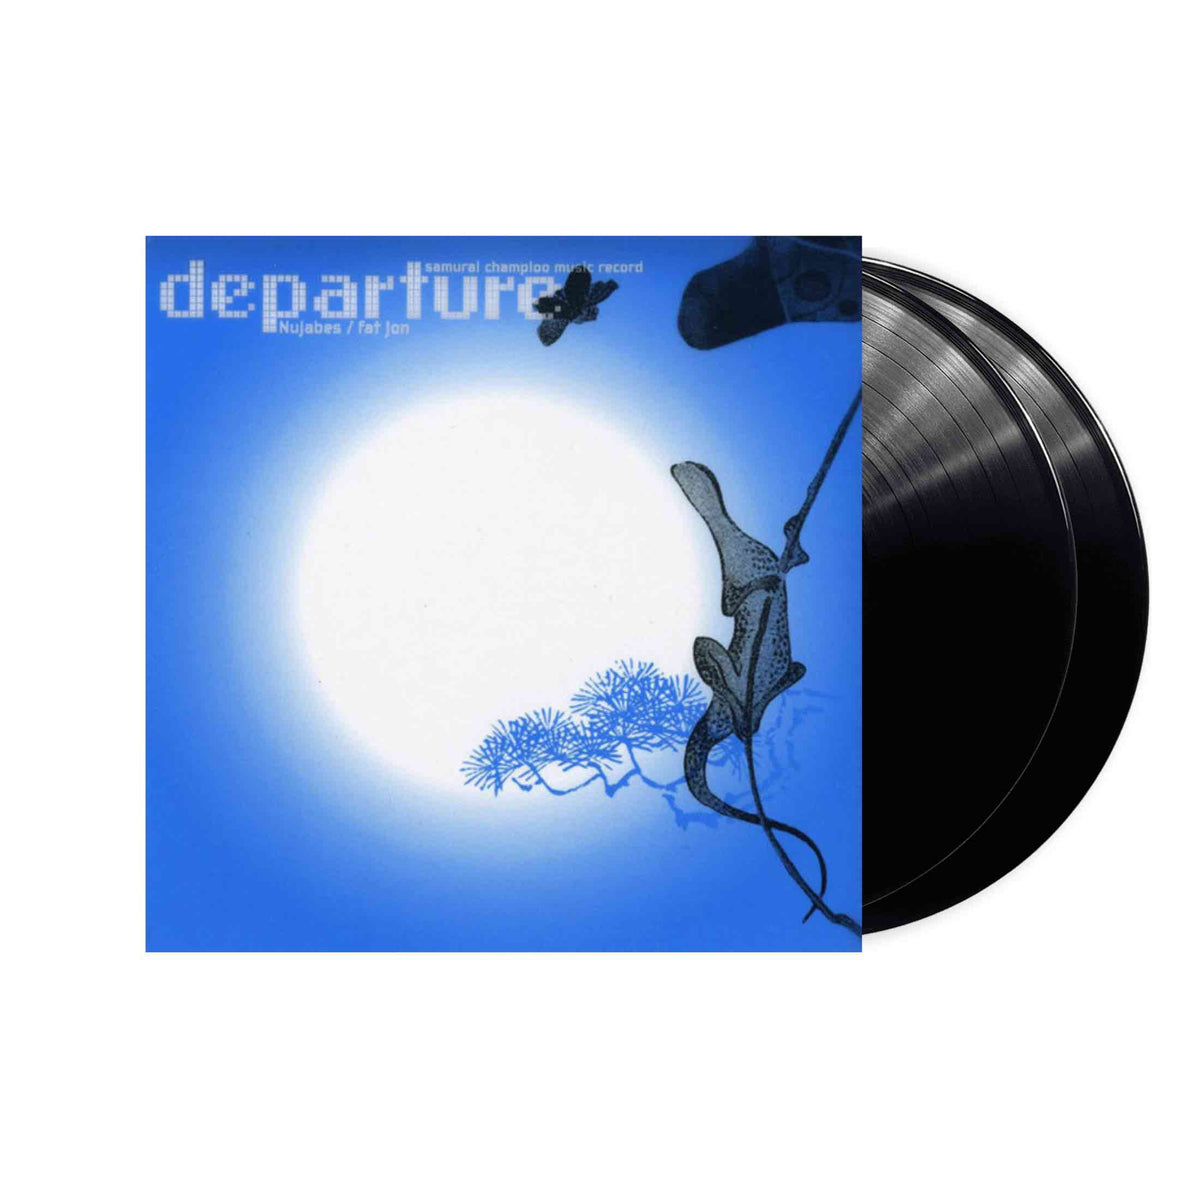 Nujabes and Fat Jon - Samurai Champloo Music Record: Departure 